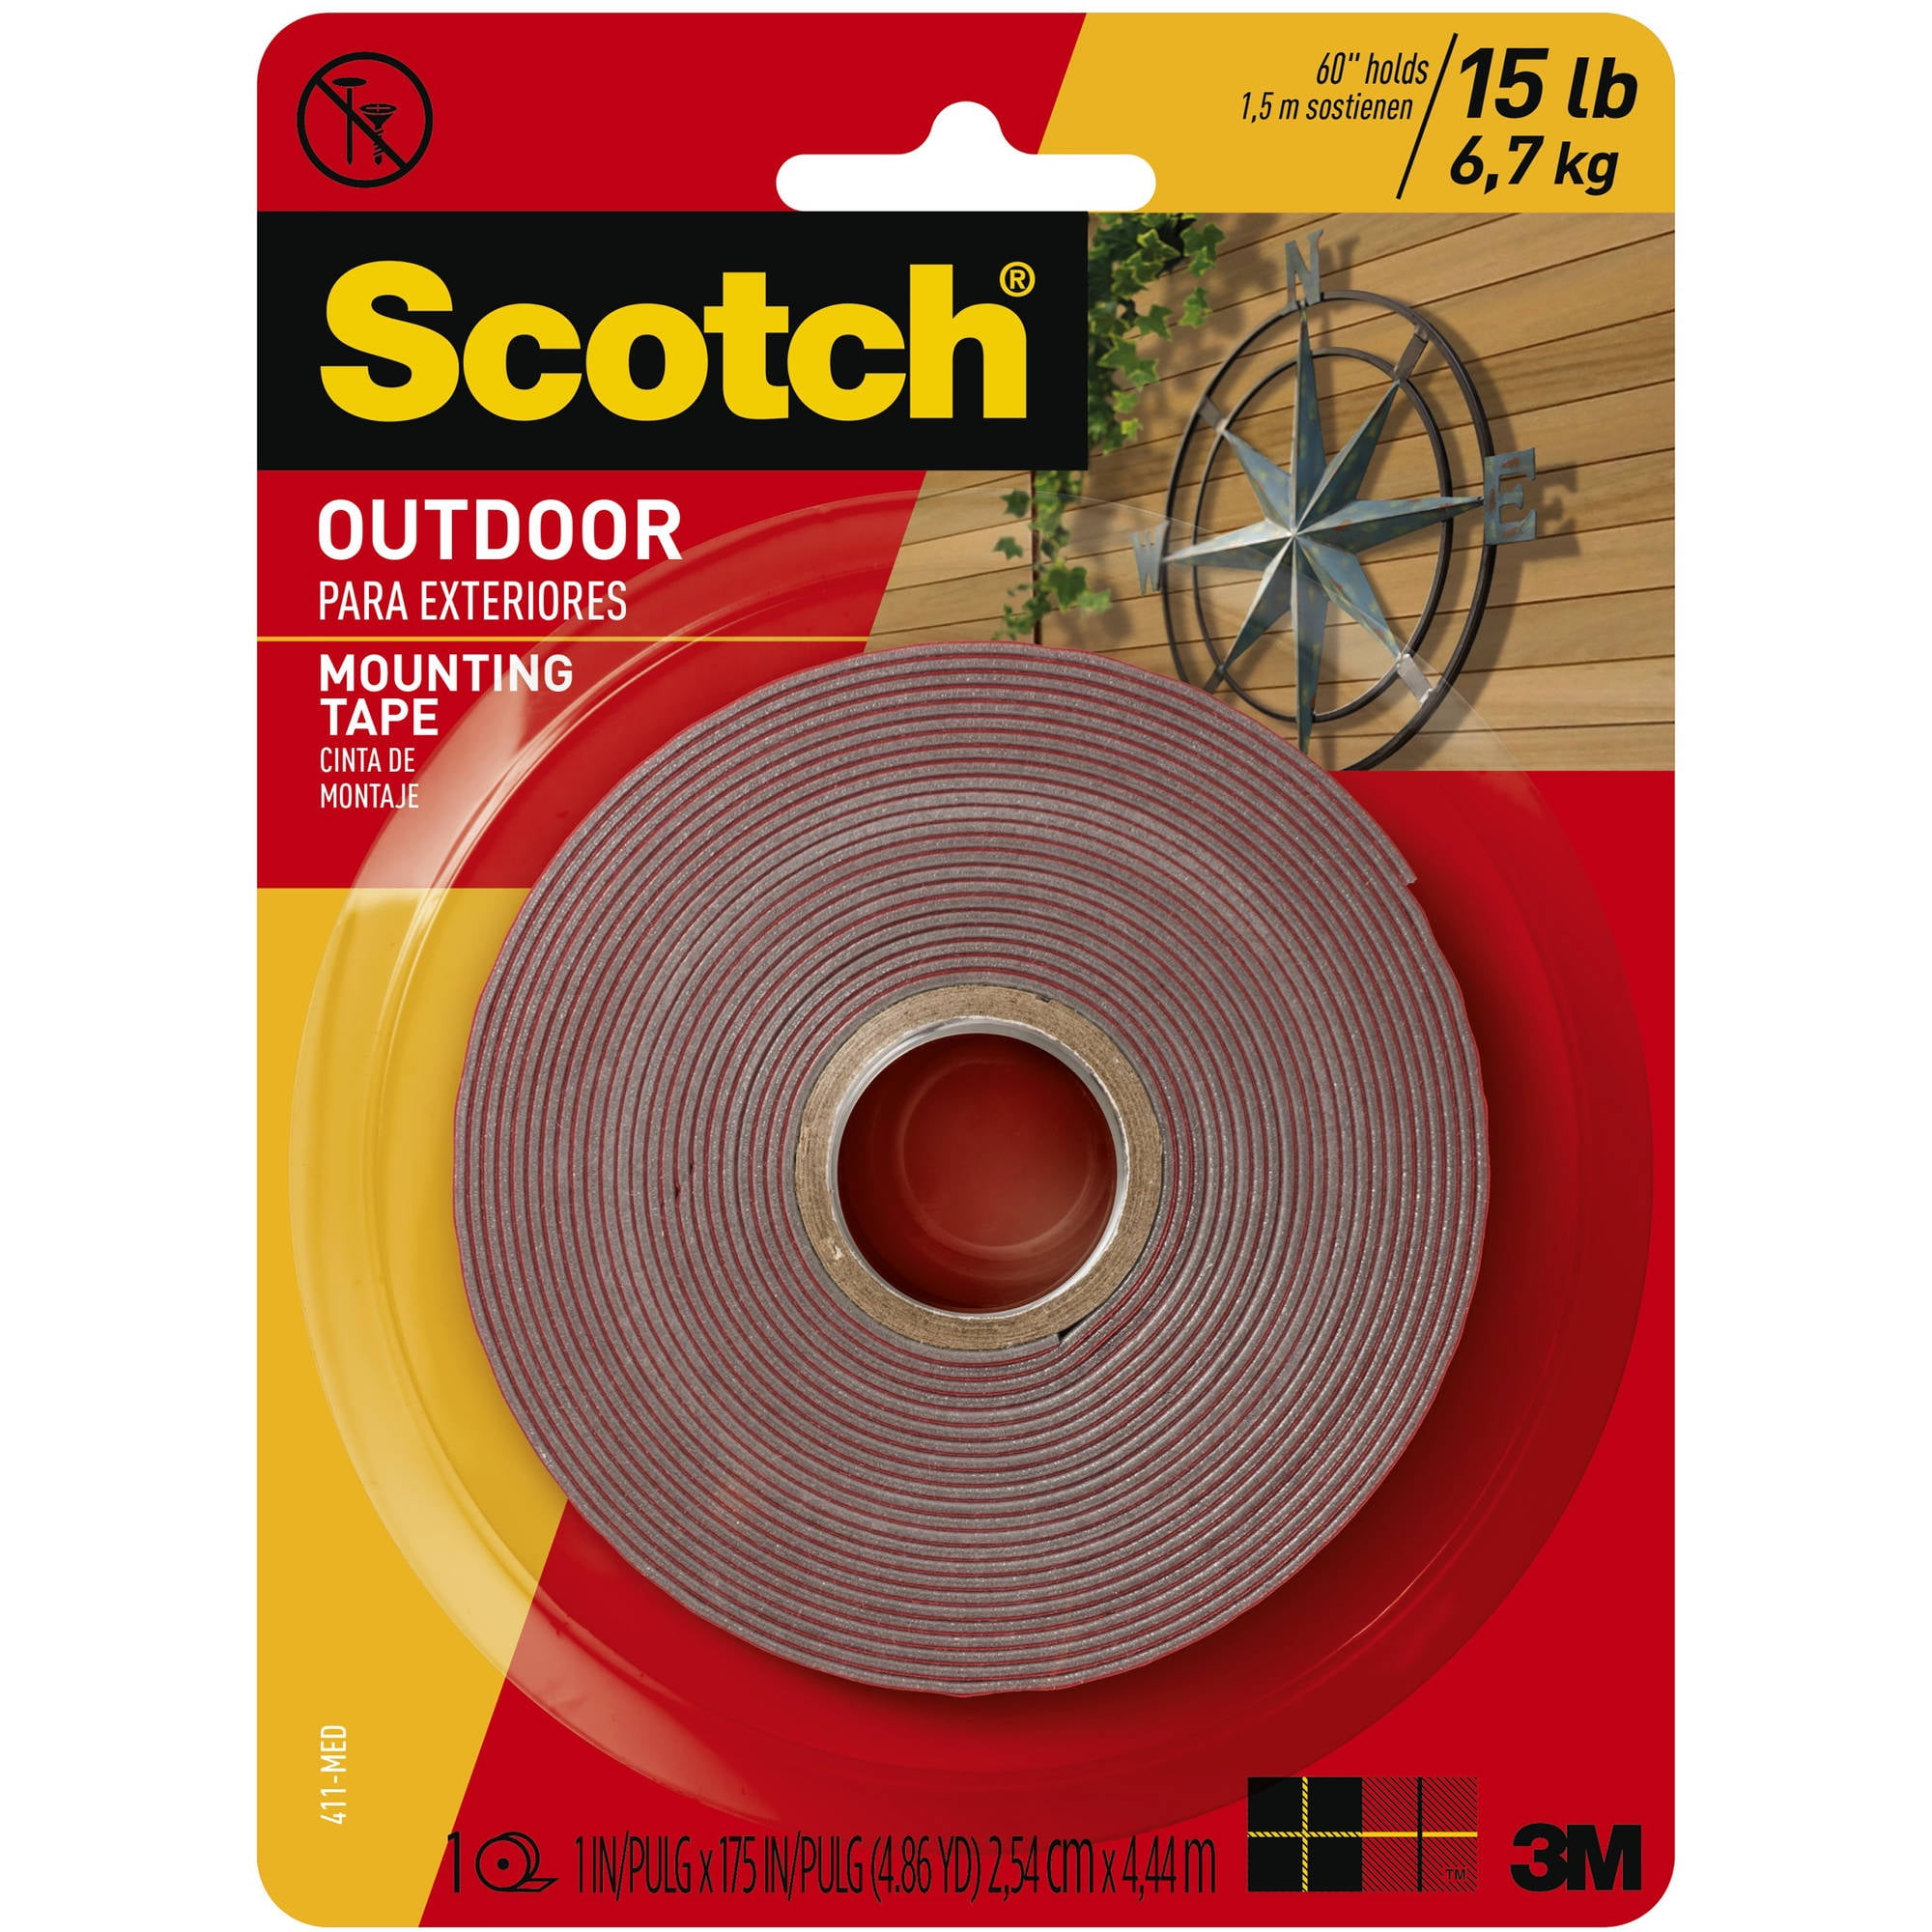 Scotch Heavy-Duty Exterior Mounting Tape Holds 5 lb 1x60 